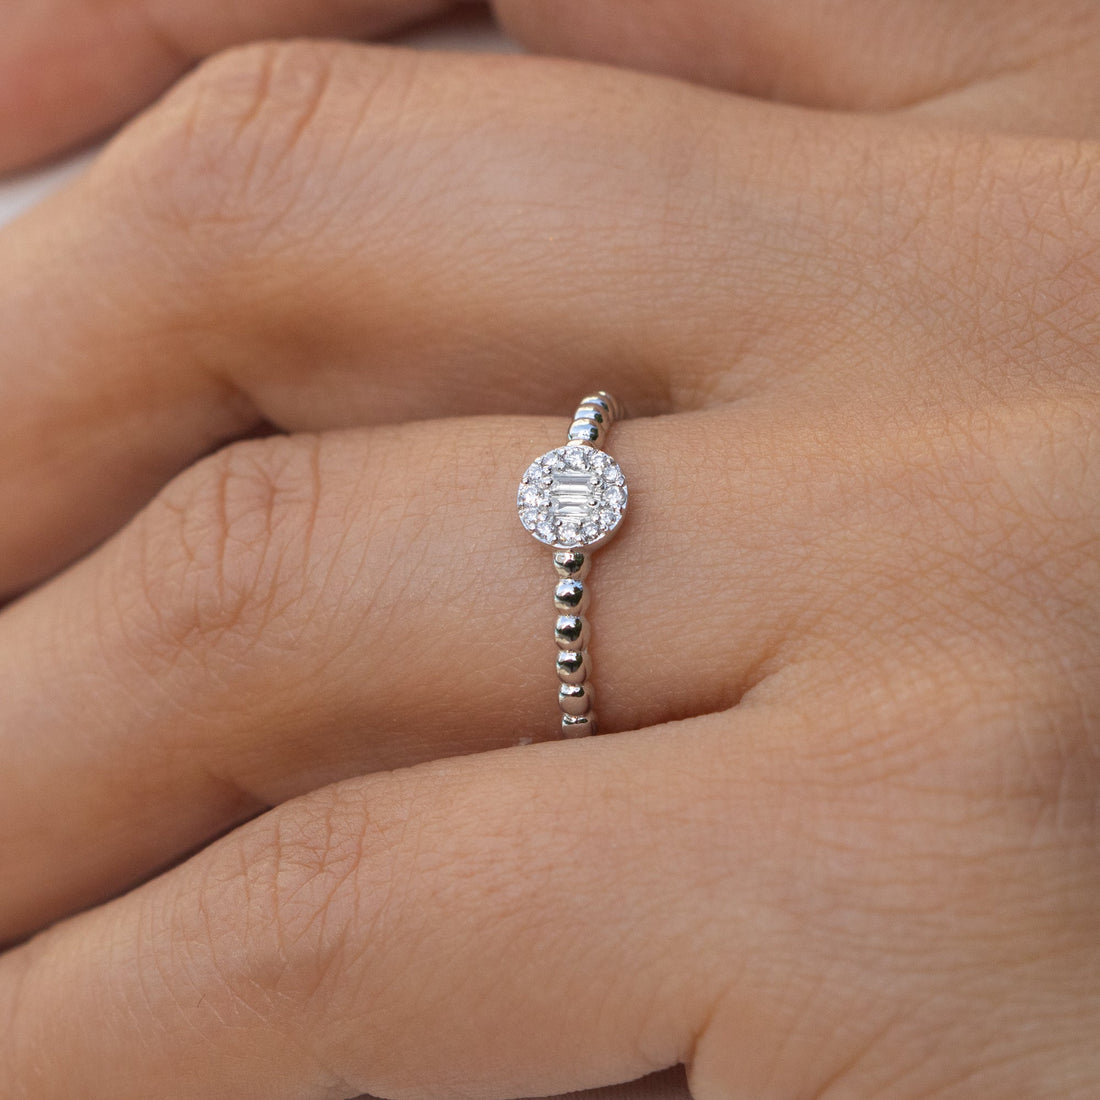  14K White Gold Baguette and Round Diamond Ring Shop online from Artisan Brands